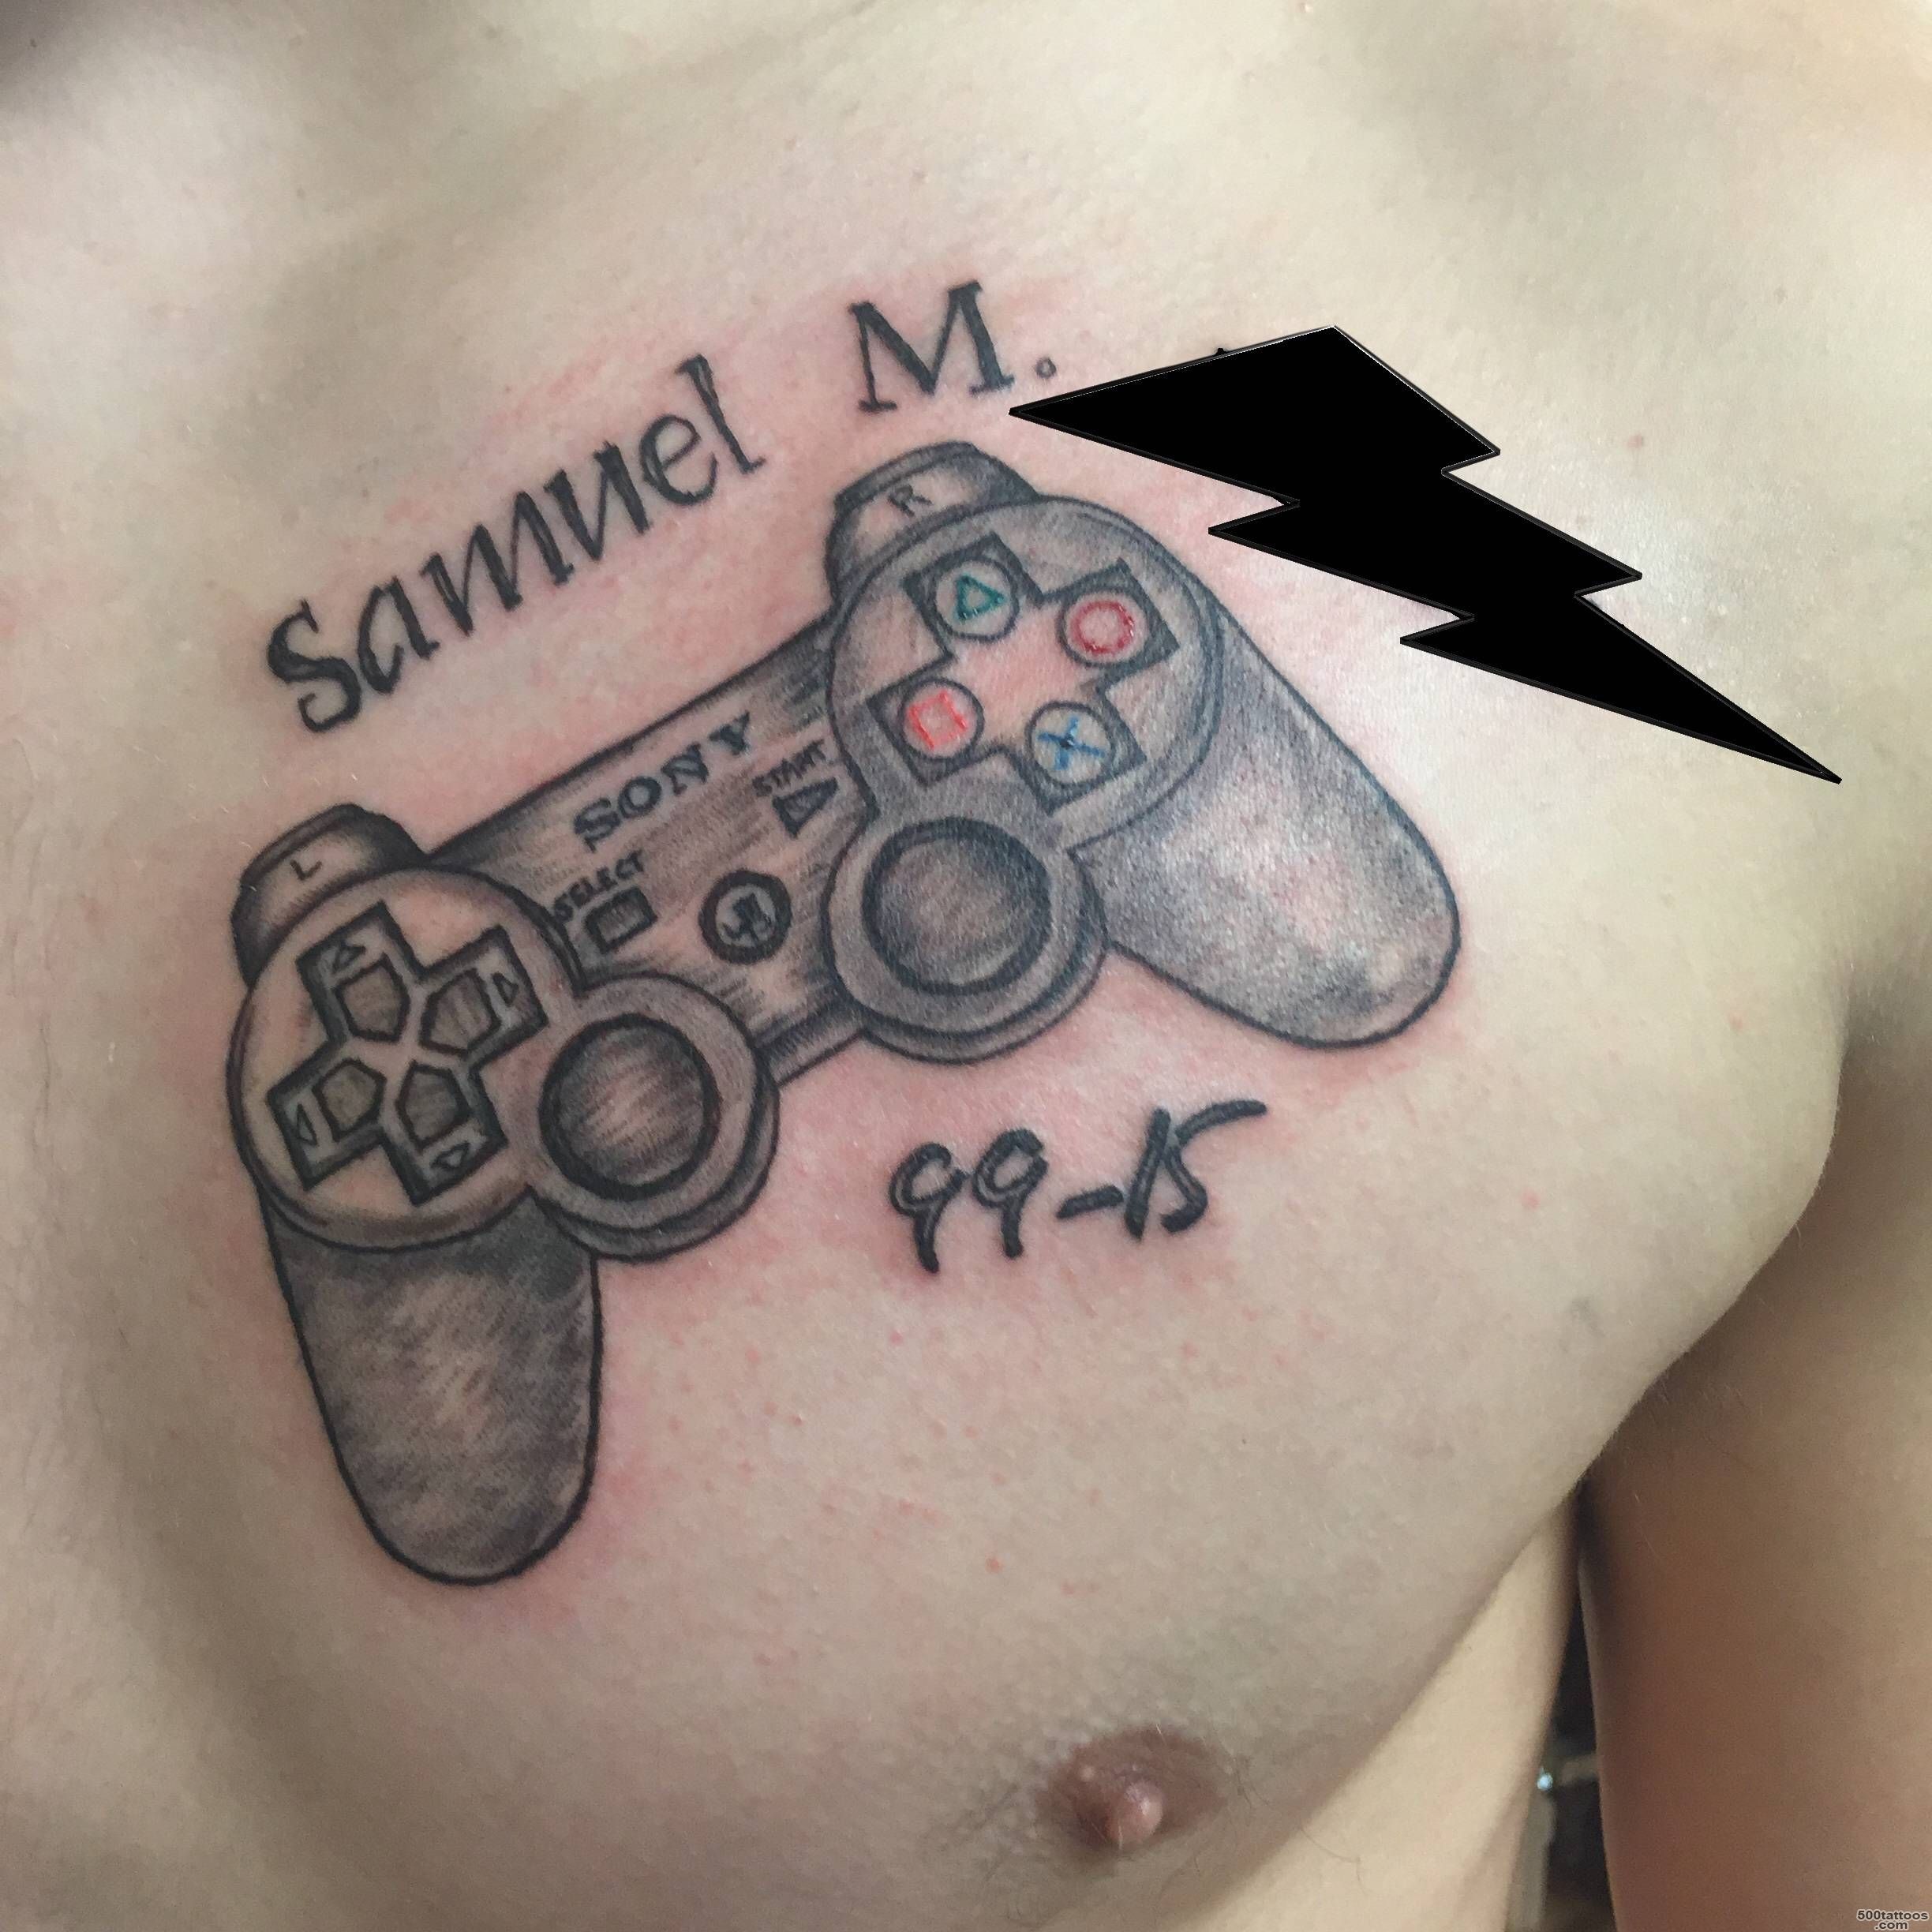 My little brother passed away in February, so I decided to get a ..._12